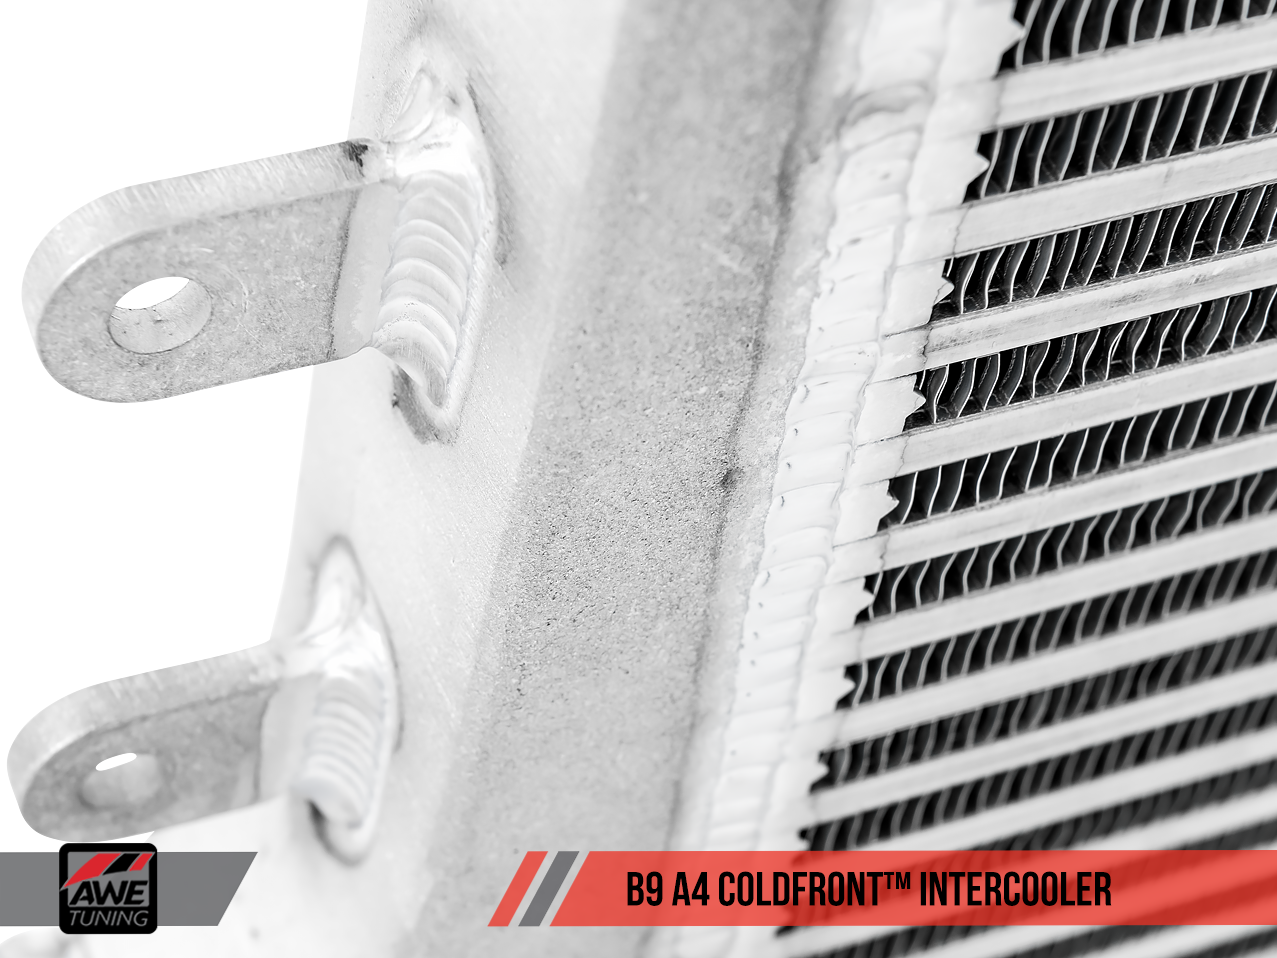 AWE ColdFront Intercooler for B9 2.0T